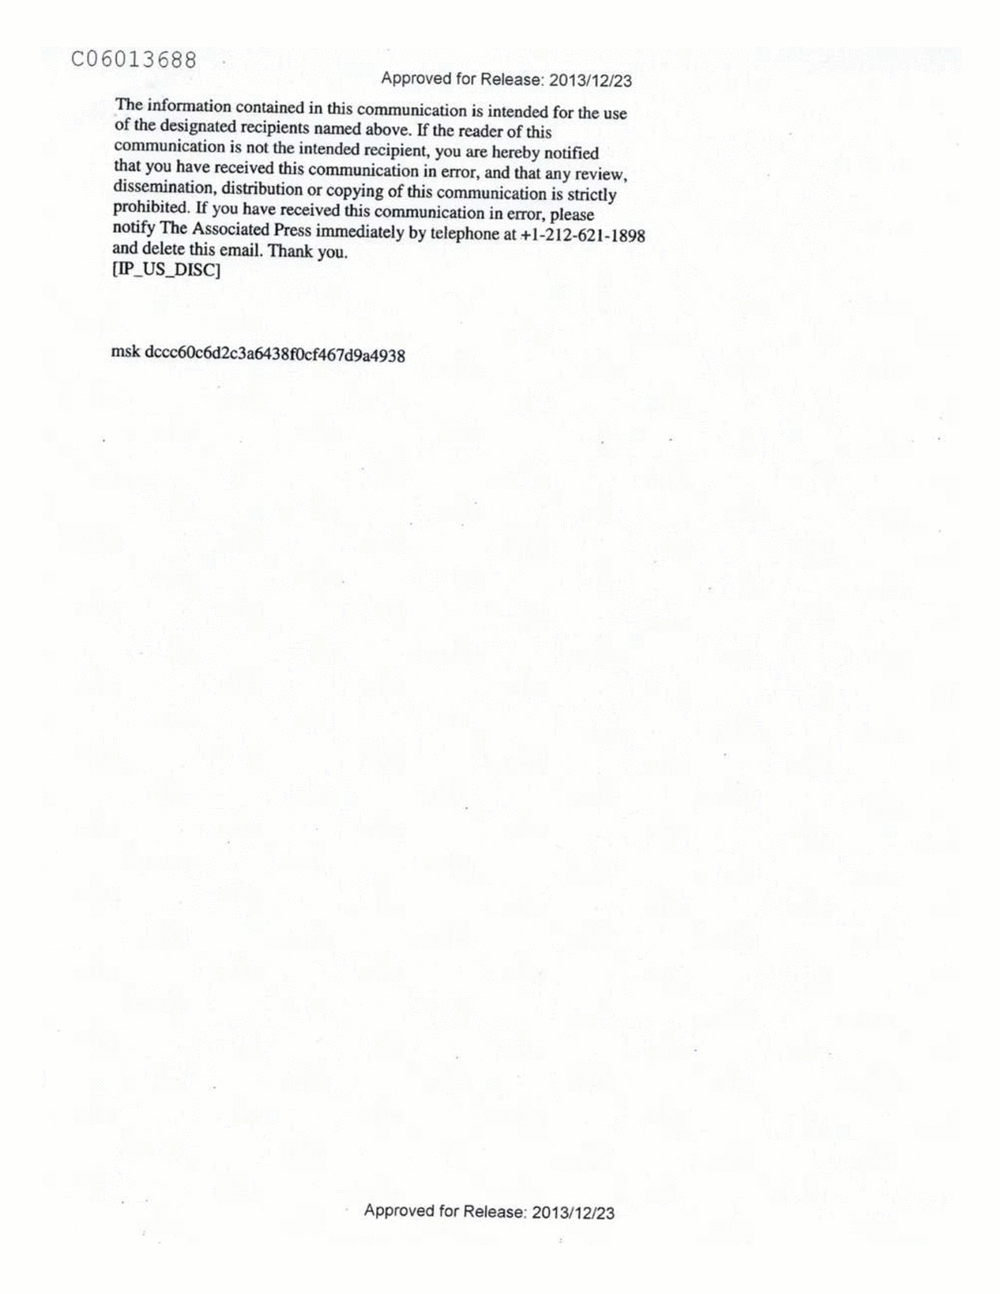 Page 546 from Email Correspondence Between Reporters and CIA Flacks